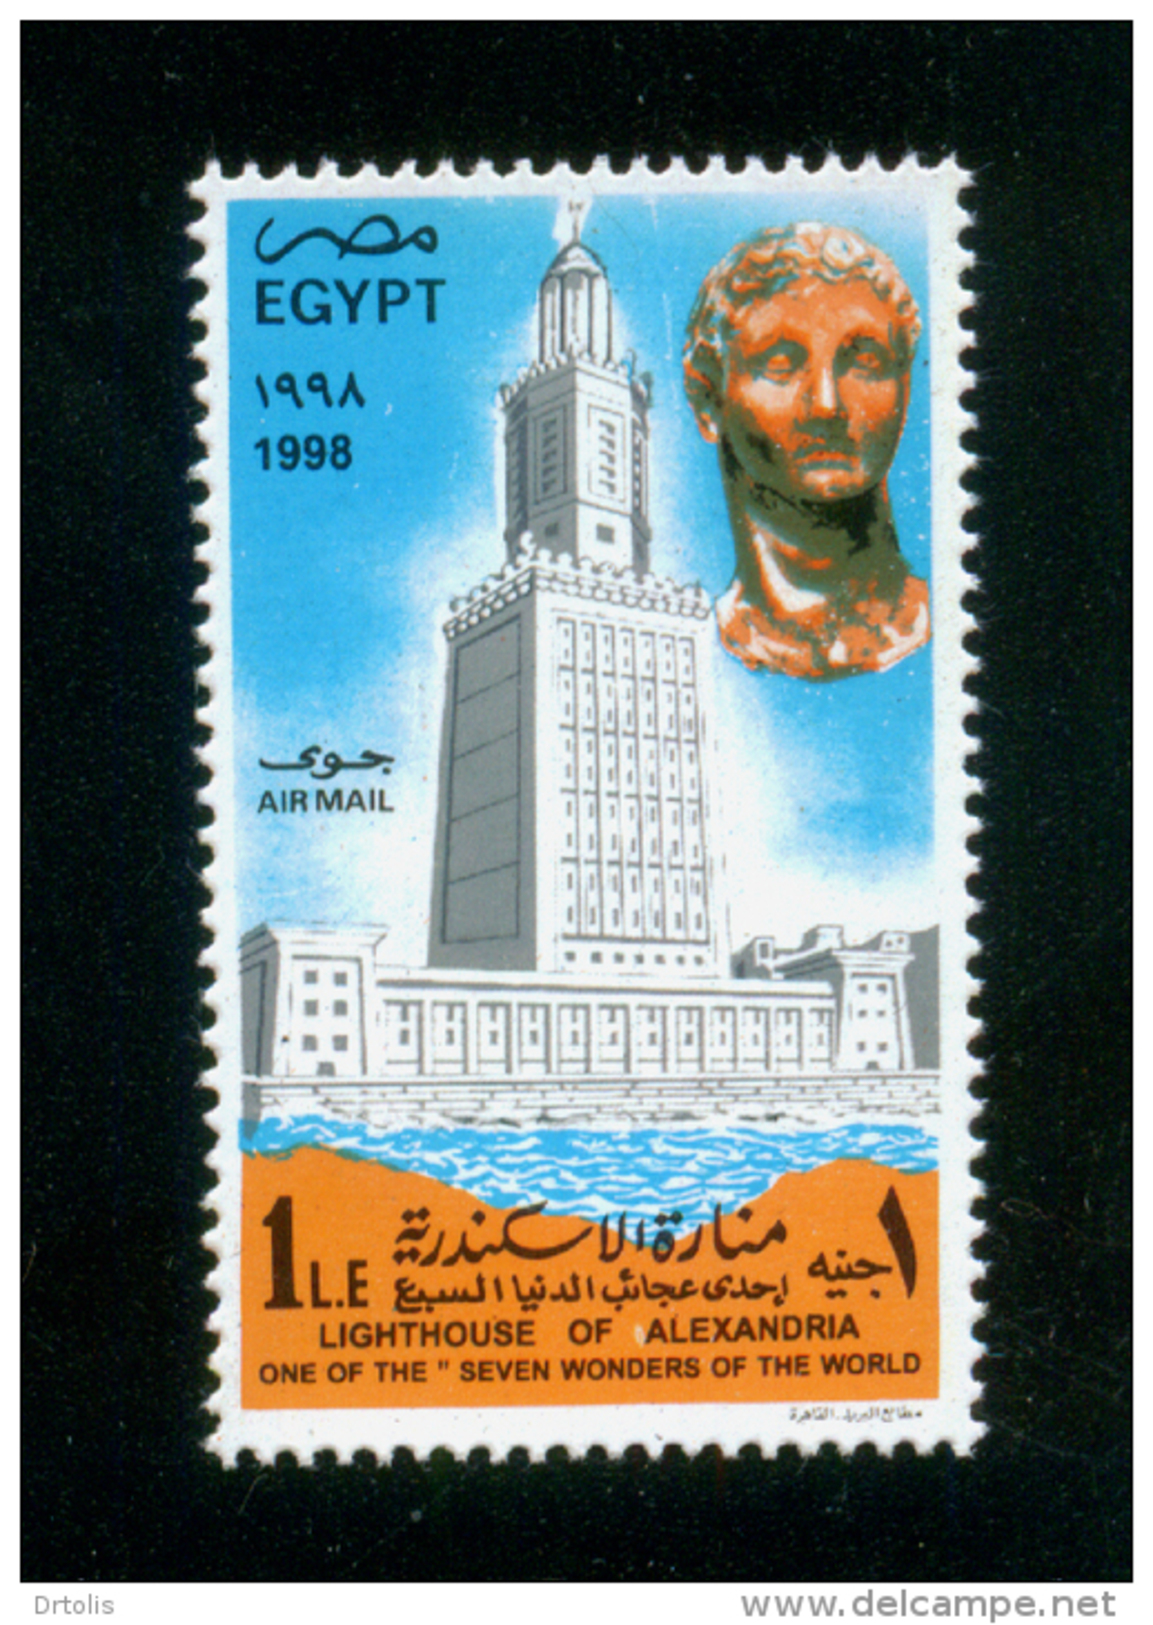 EGYPT / 1998 / AIRMAIL / LIGHTHOUSE OF ALEXANDRIA / ALEXANDER THE GREAT / MNH / VF - Nuovi